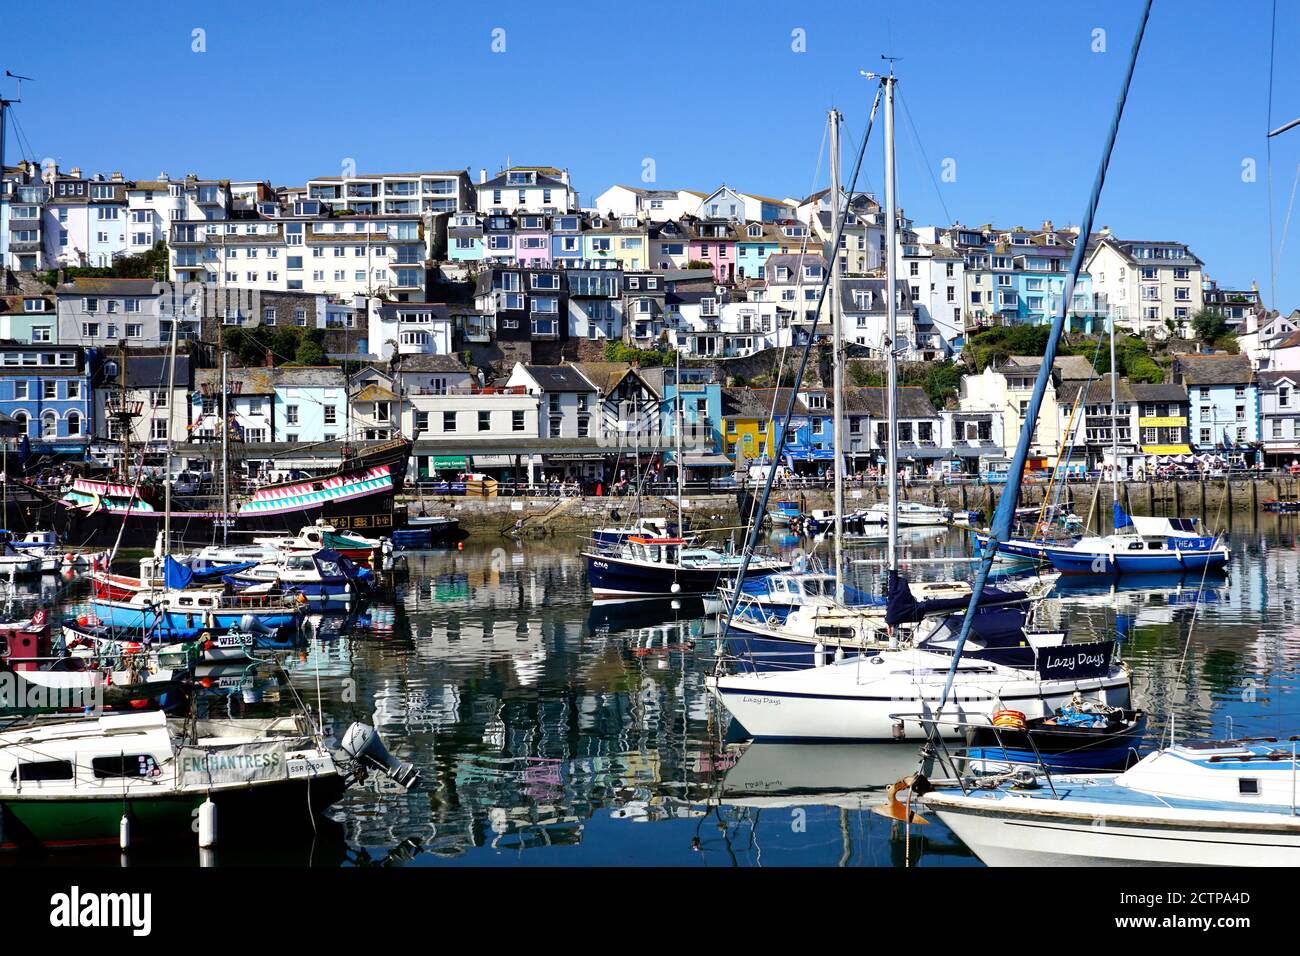 Brixham, Devon, UK.  September 14, 2020.  Tourists and holidaymakers enjoying the beautiful architecture and boats at the inner harbour of Brixham in Stock Photo